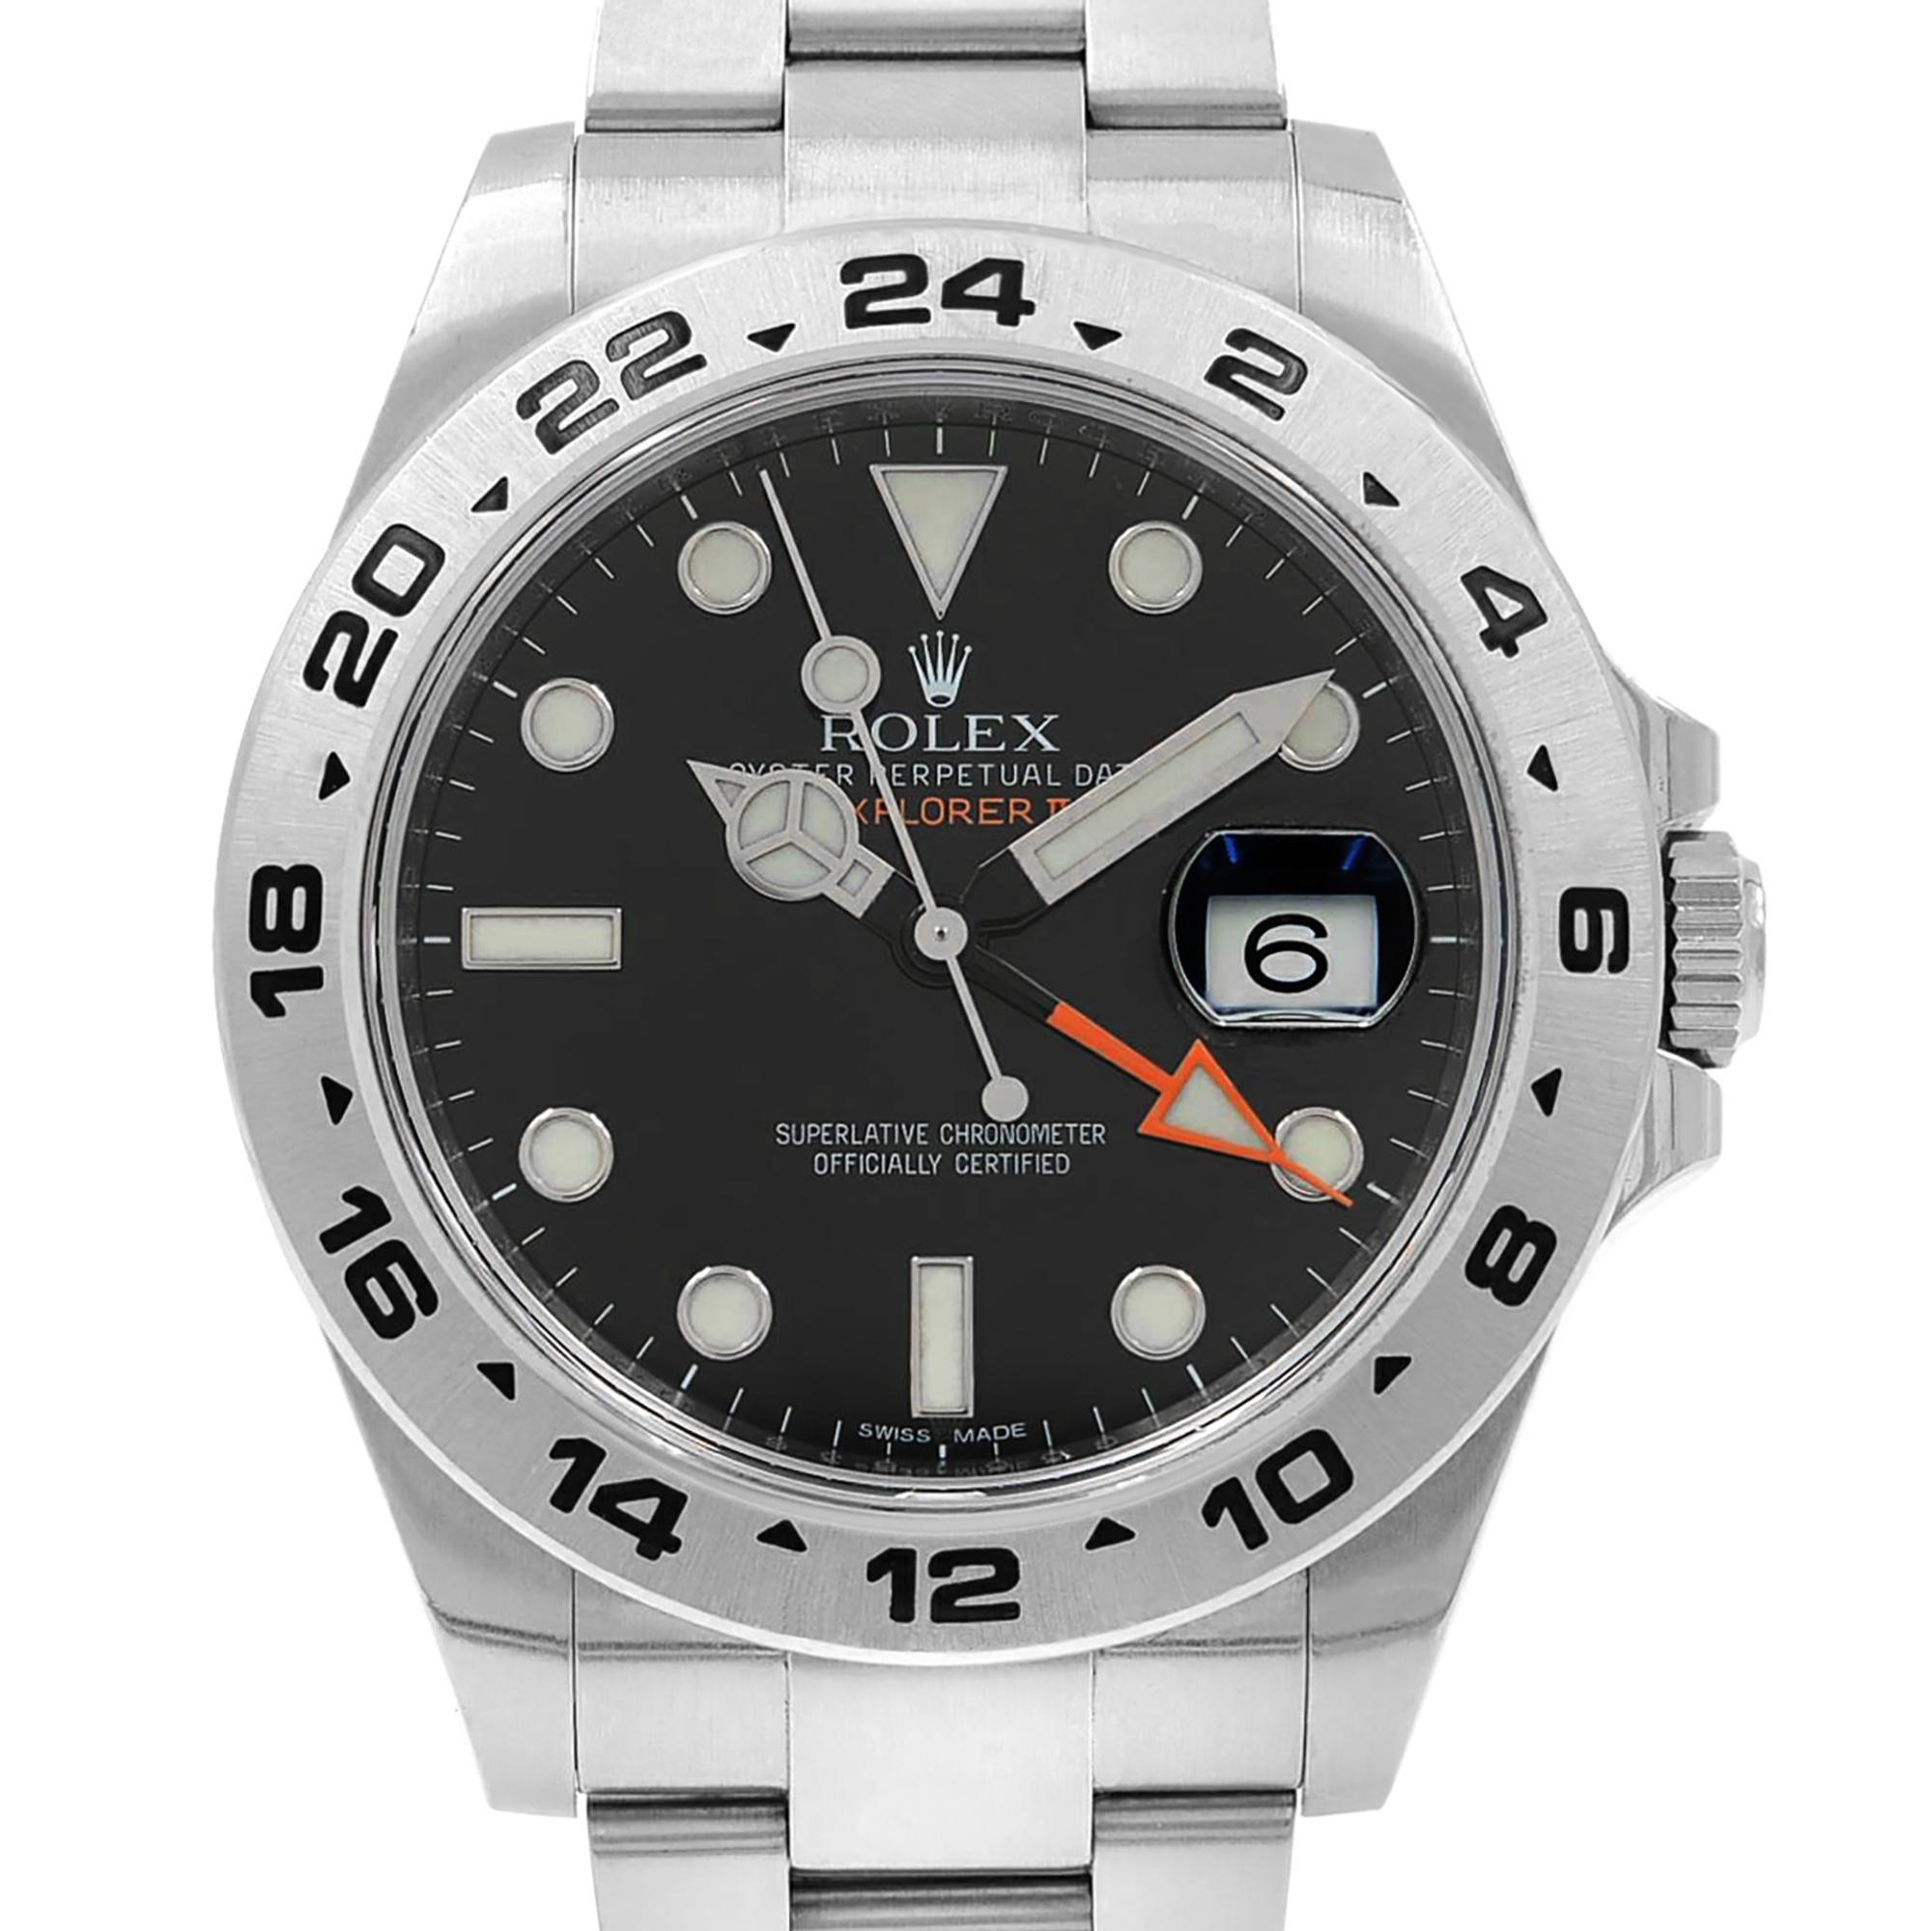 Pre owned Rolex Explorer II GMT Stainless Steel White Dial Automatic Men's Watch 216570. 2018 Card. This Beautiful Timepiece Features: Stainless Steel Case with a Stainless Steel Oyster Flat 3-Piece Link Bracelet, Fixed Stainless Steel Bezel, Black